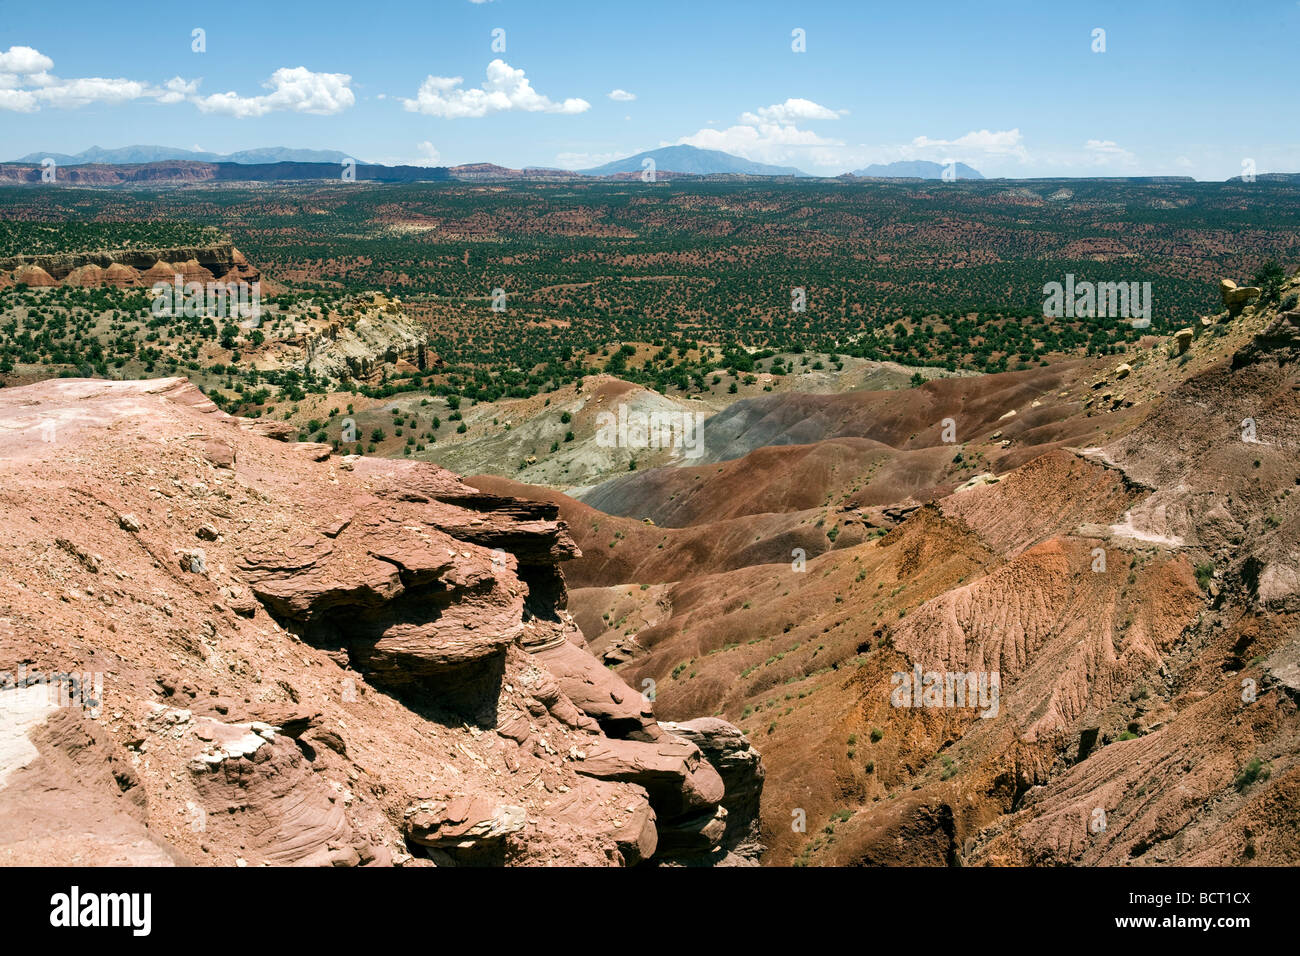 Elevated view of the Grand Staircase Escalante national Monument area north of the city of Escalante Utah Stock Photo